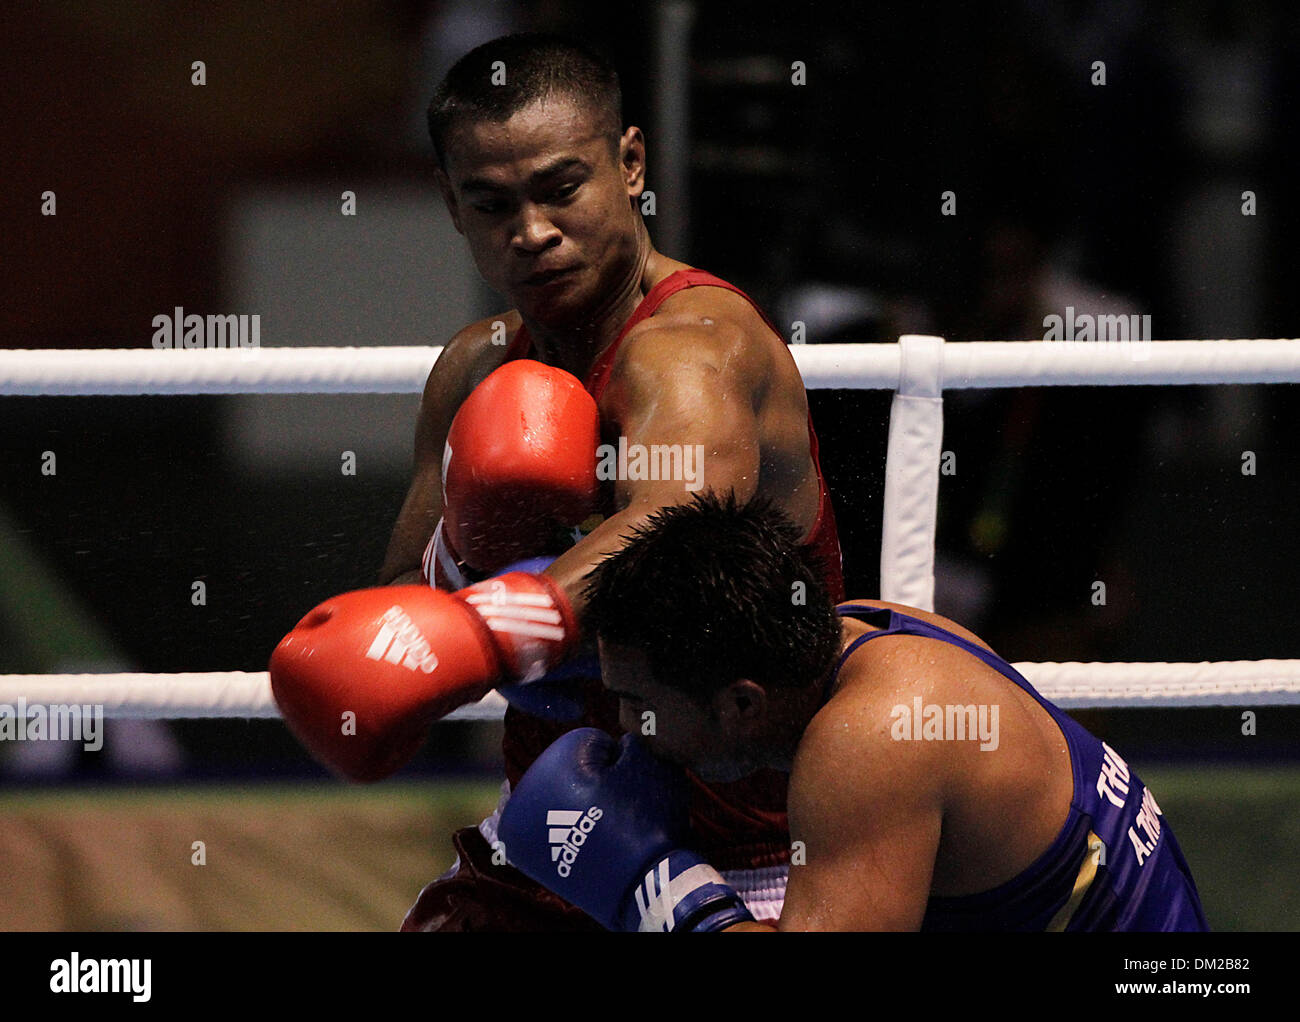 Nay Pyi Taw, Myanmar. 11th Dec, 2013. Aung Ko Ko (above) of Myanmar fights against Anavat Thongra of Thailand during men's 81 kg boxing match at 27th SEA Games in Nay Pyi Taw, Myanmar, Dec. 10, 2013. Anavat Thongra of Thailand won the match. © Thet Htoo/Xinhua/Alamy Live News Stock Photo